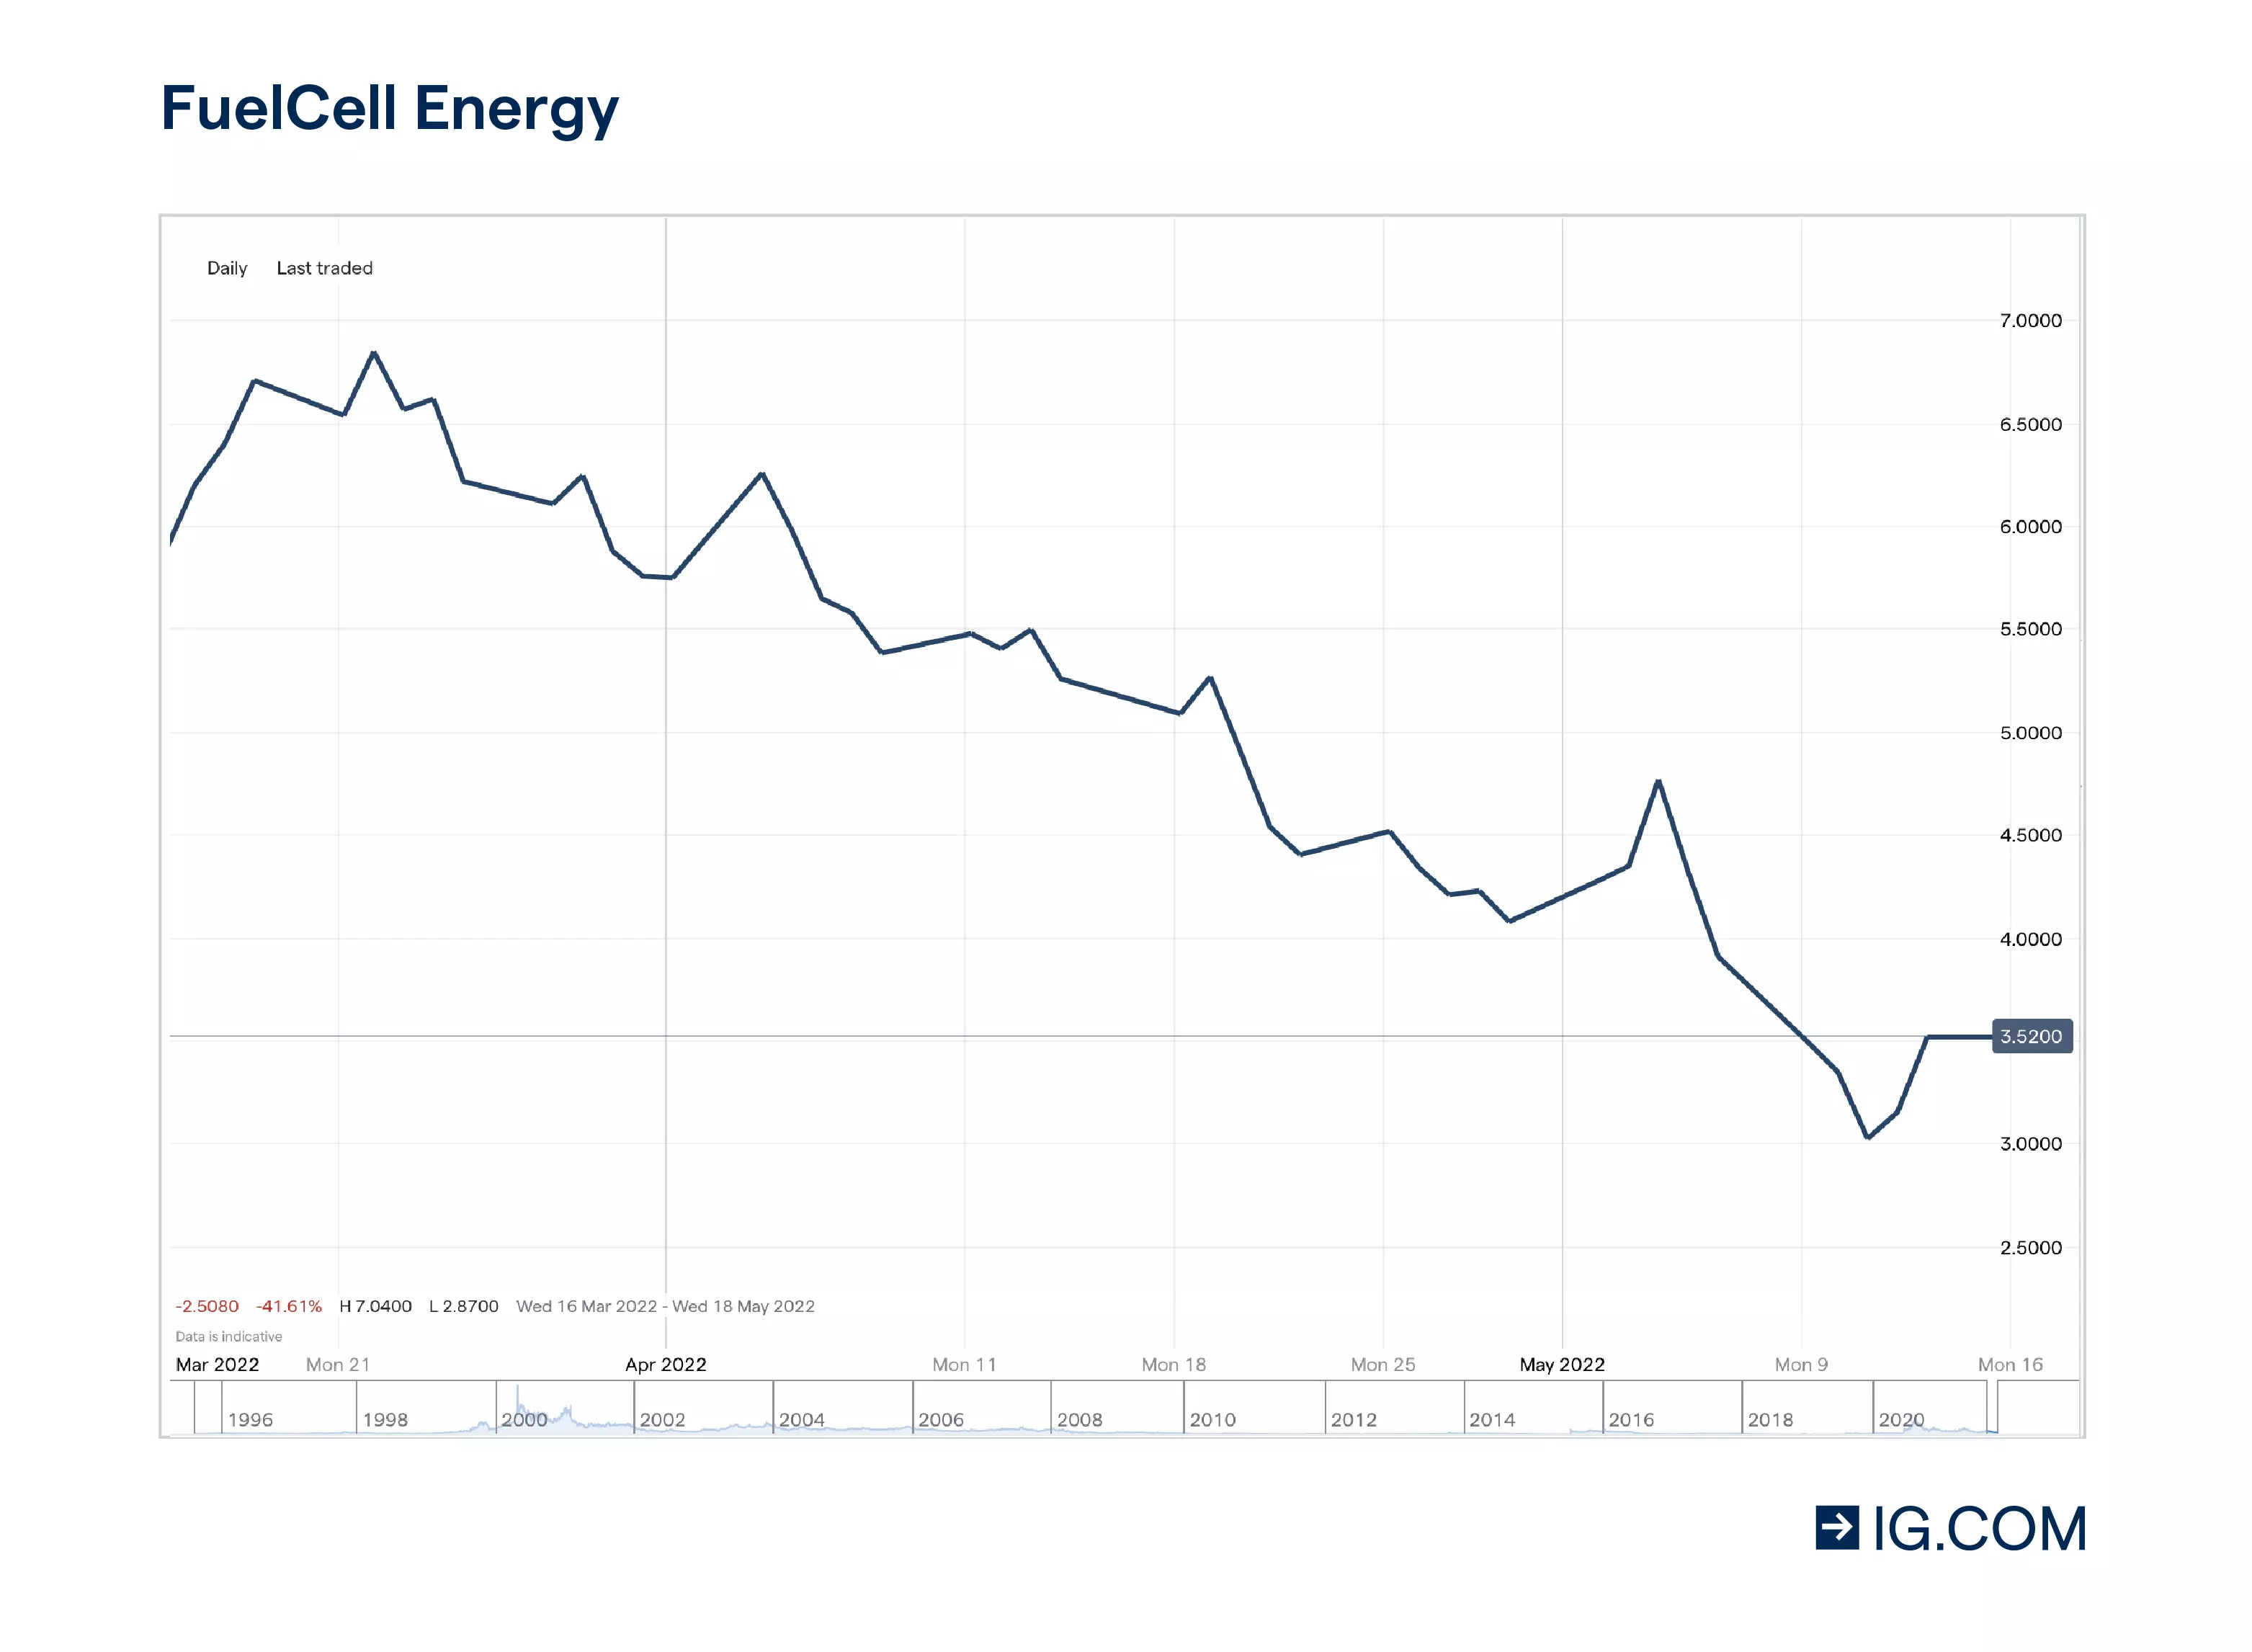 FuelCell Energy price chart showing the how the stock has declined from $10.00 a year prior to $4.41 per share